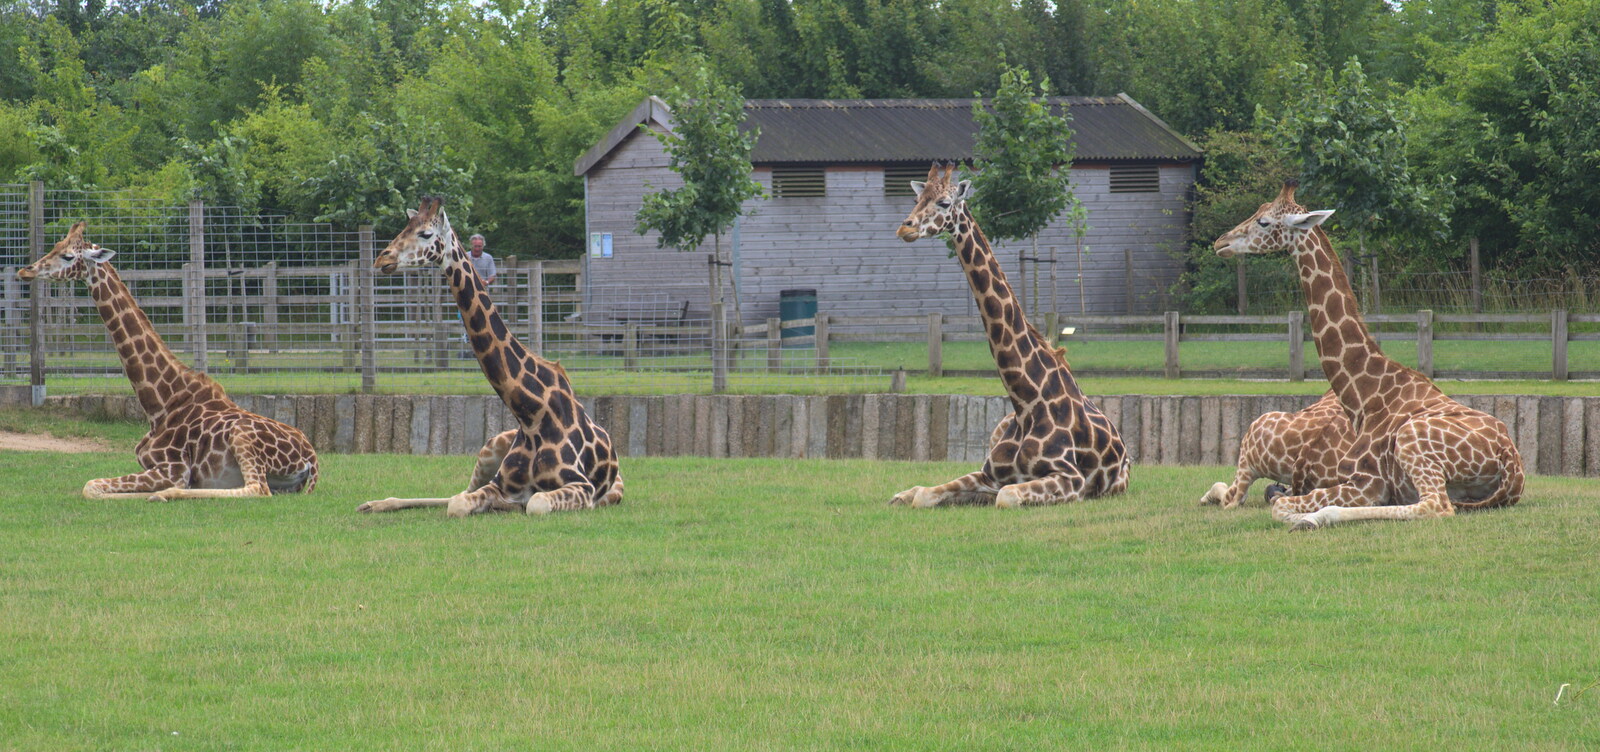 Four giraffe look up from Tiger Cubs at Banham Zoo, Banham, Norfolk - 6th August 2013